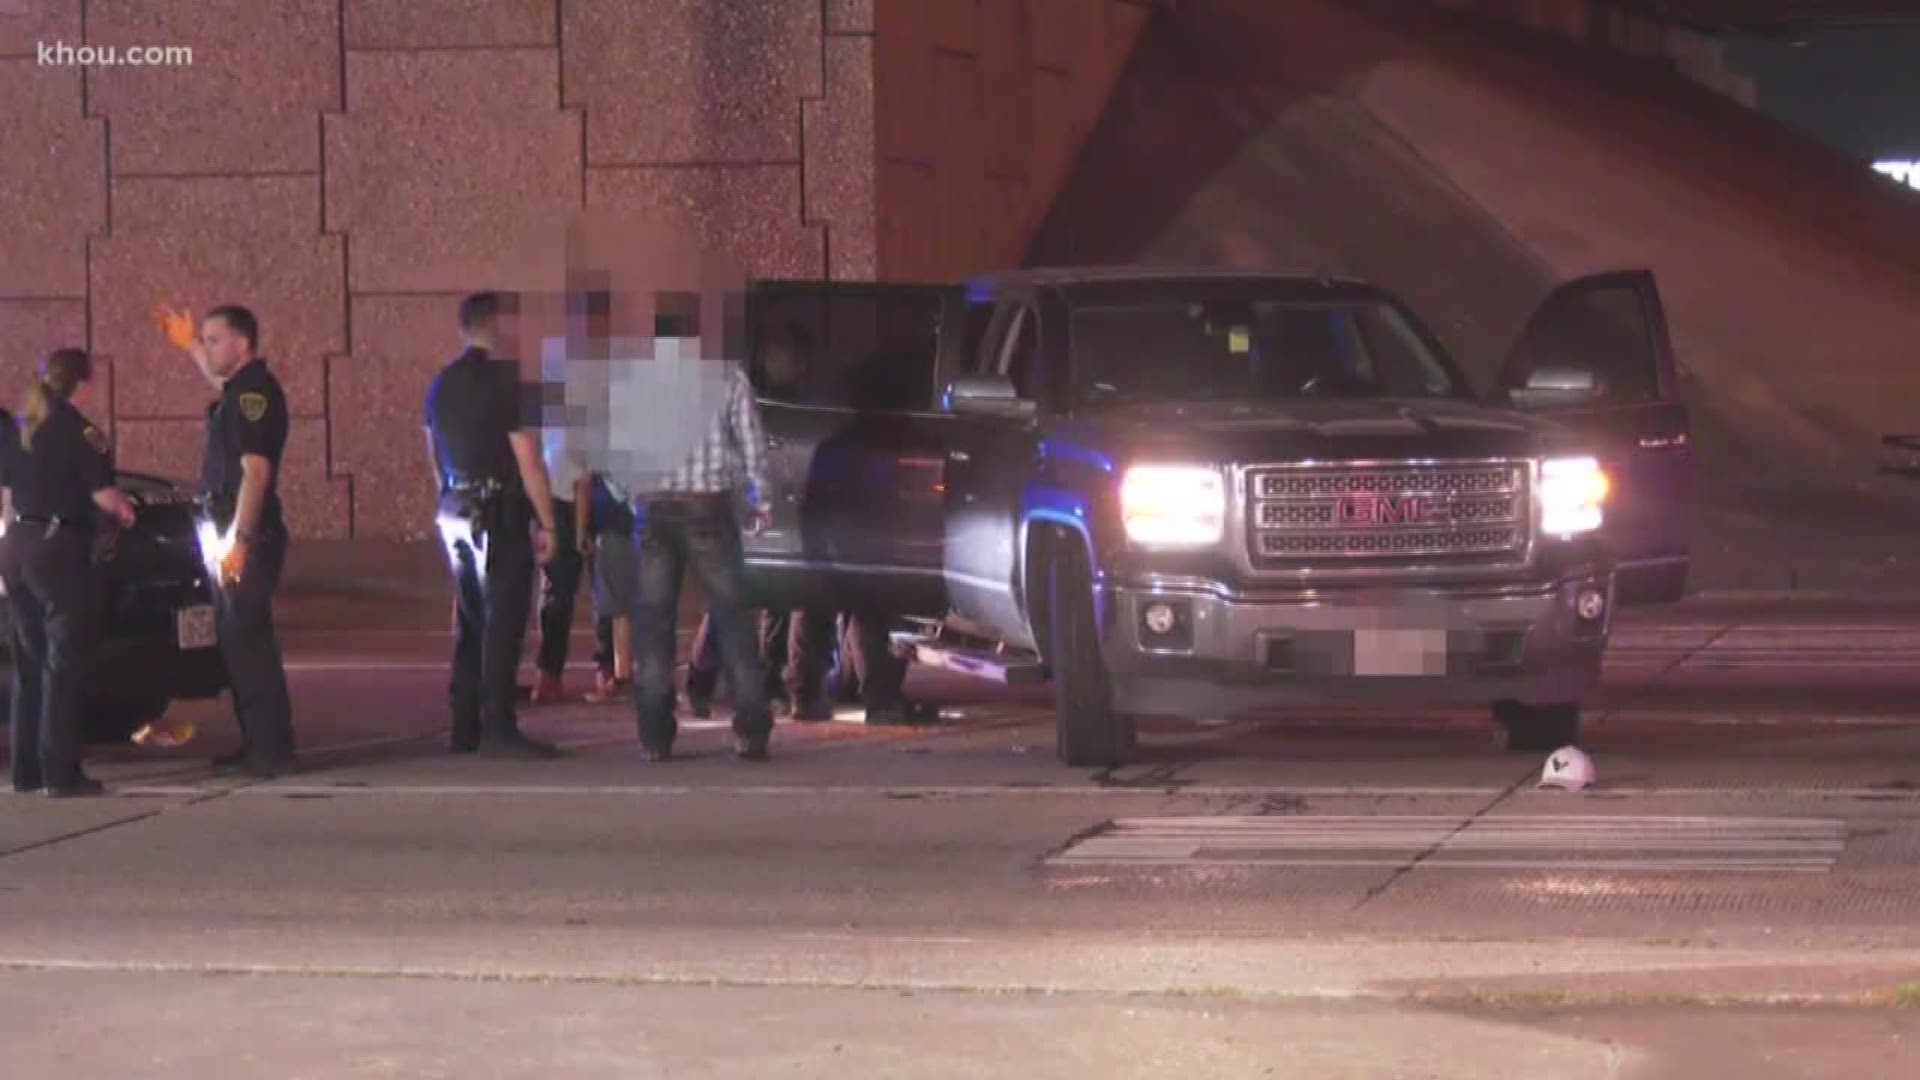 Houston Police say a dangerous freeway shooter is still on the loose after shooting at a family's pickup truck along the Gulf Freeway late Saturday night.